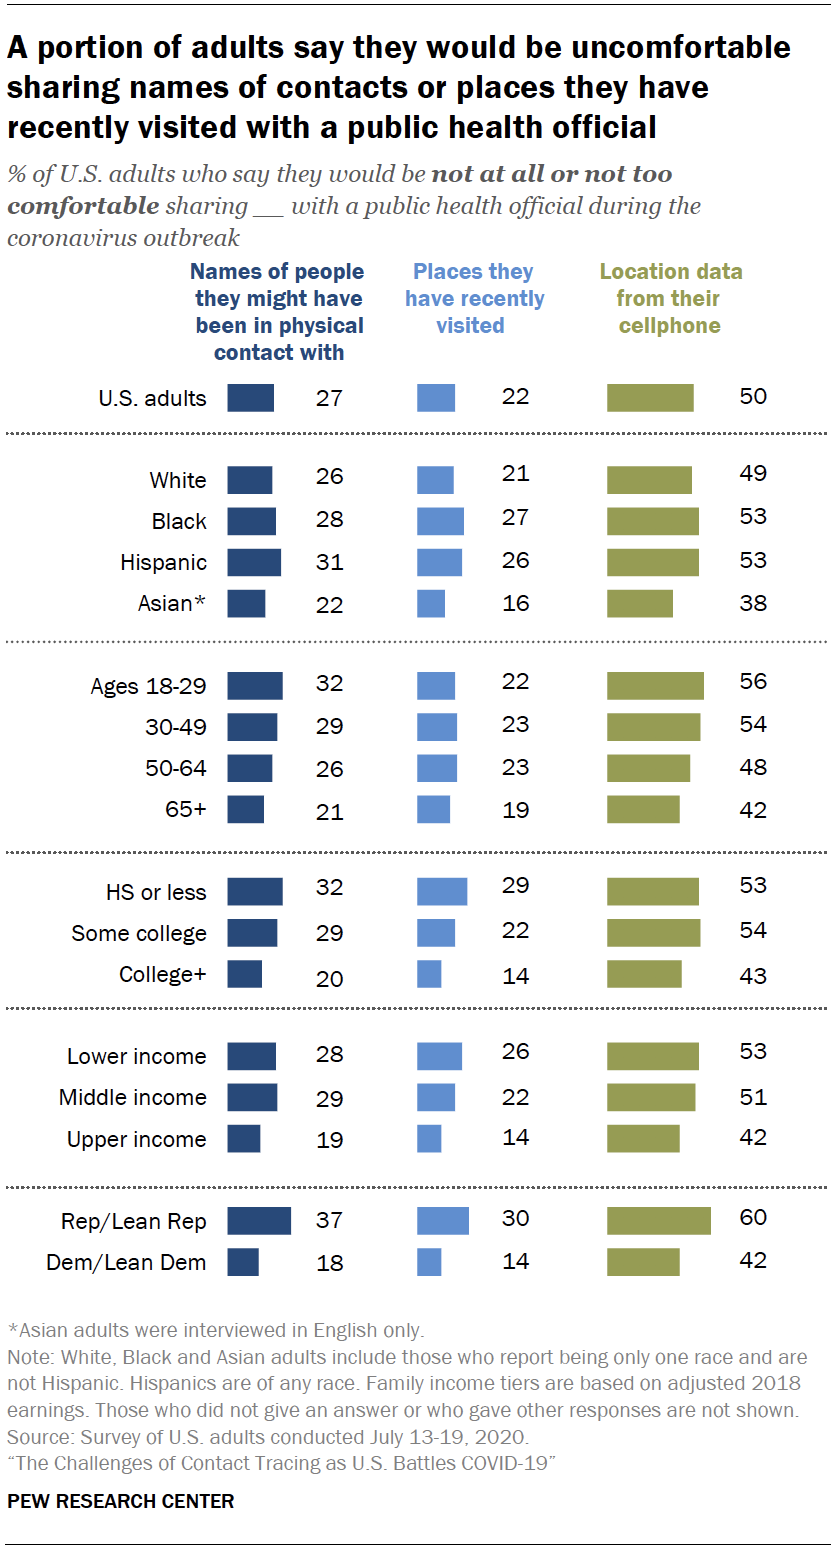 Chart shows a portion of adults say they would be uncomfortable sharing names of contacts or places they have recently visited with a public health official